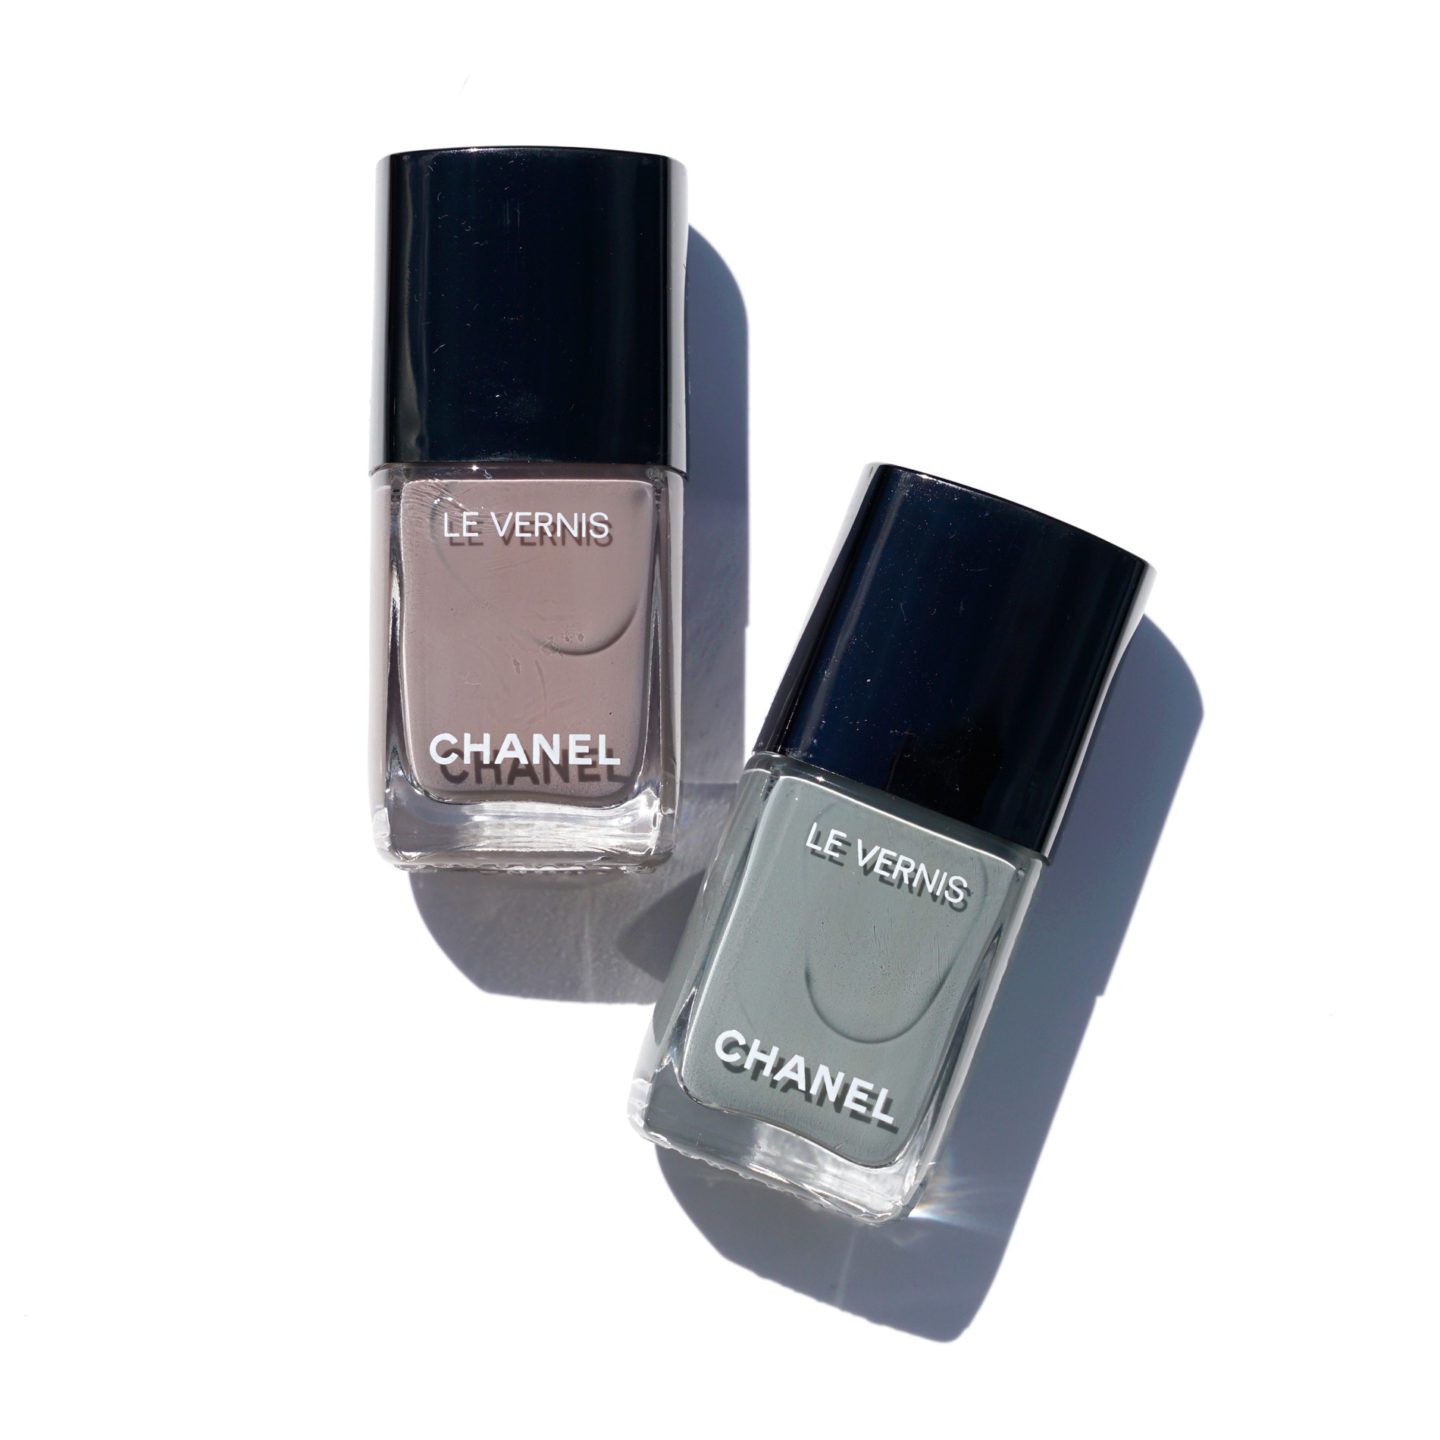 Chanel Le Vernis New Dawn (mauve) and Horizon Line (green) | The Beauty Look Book 